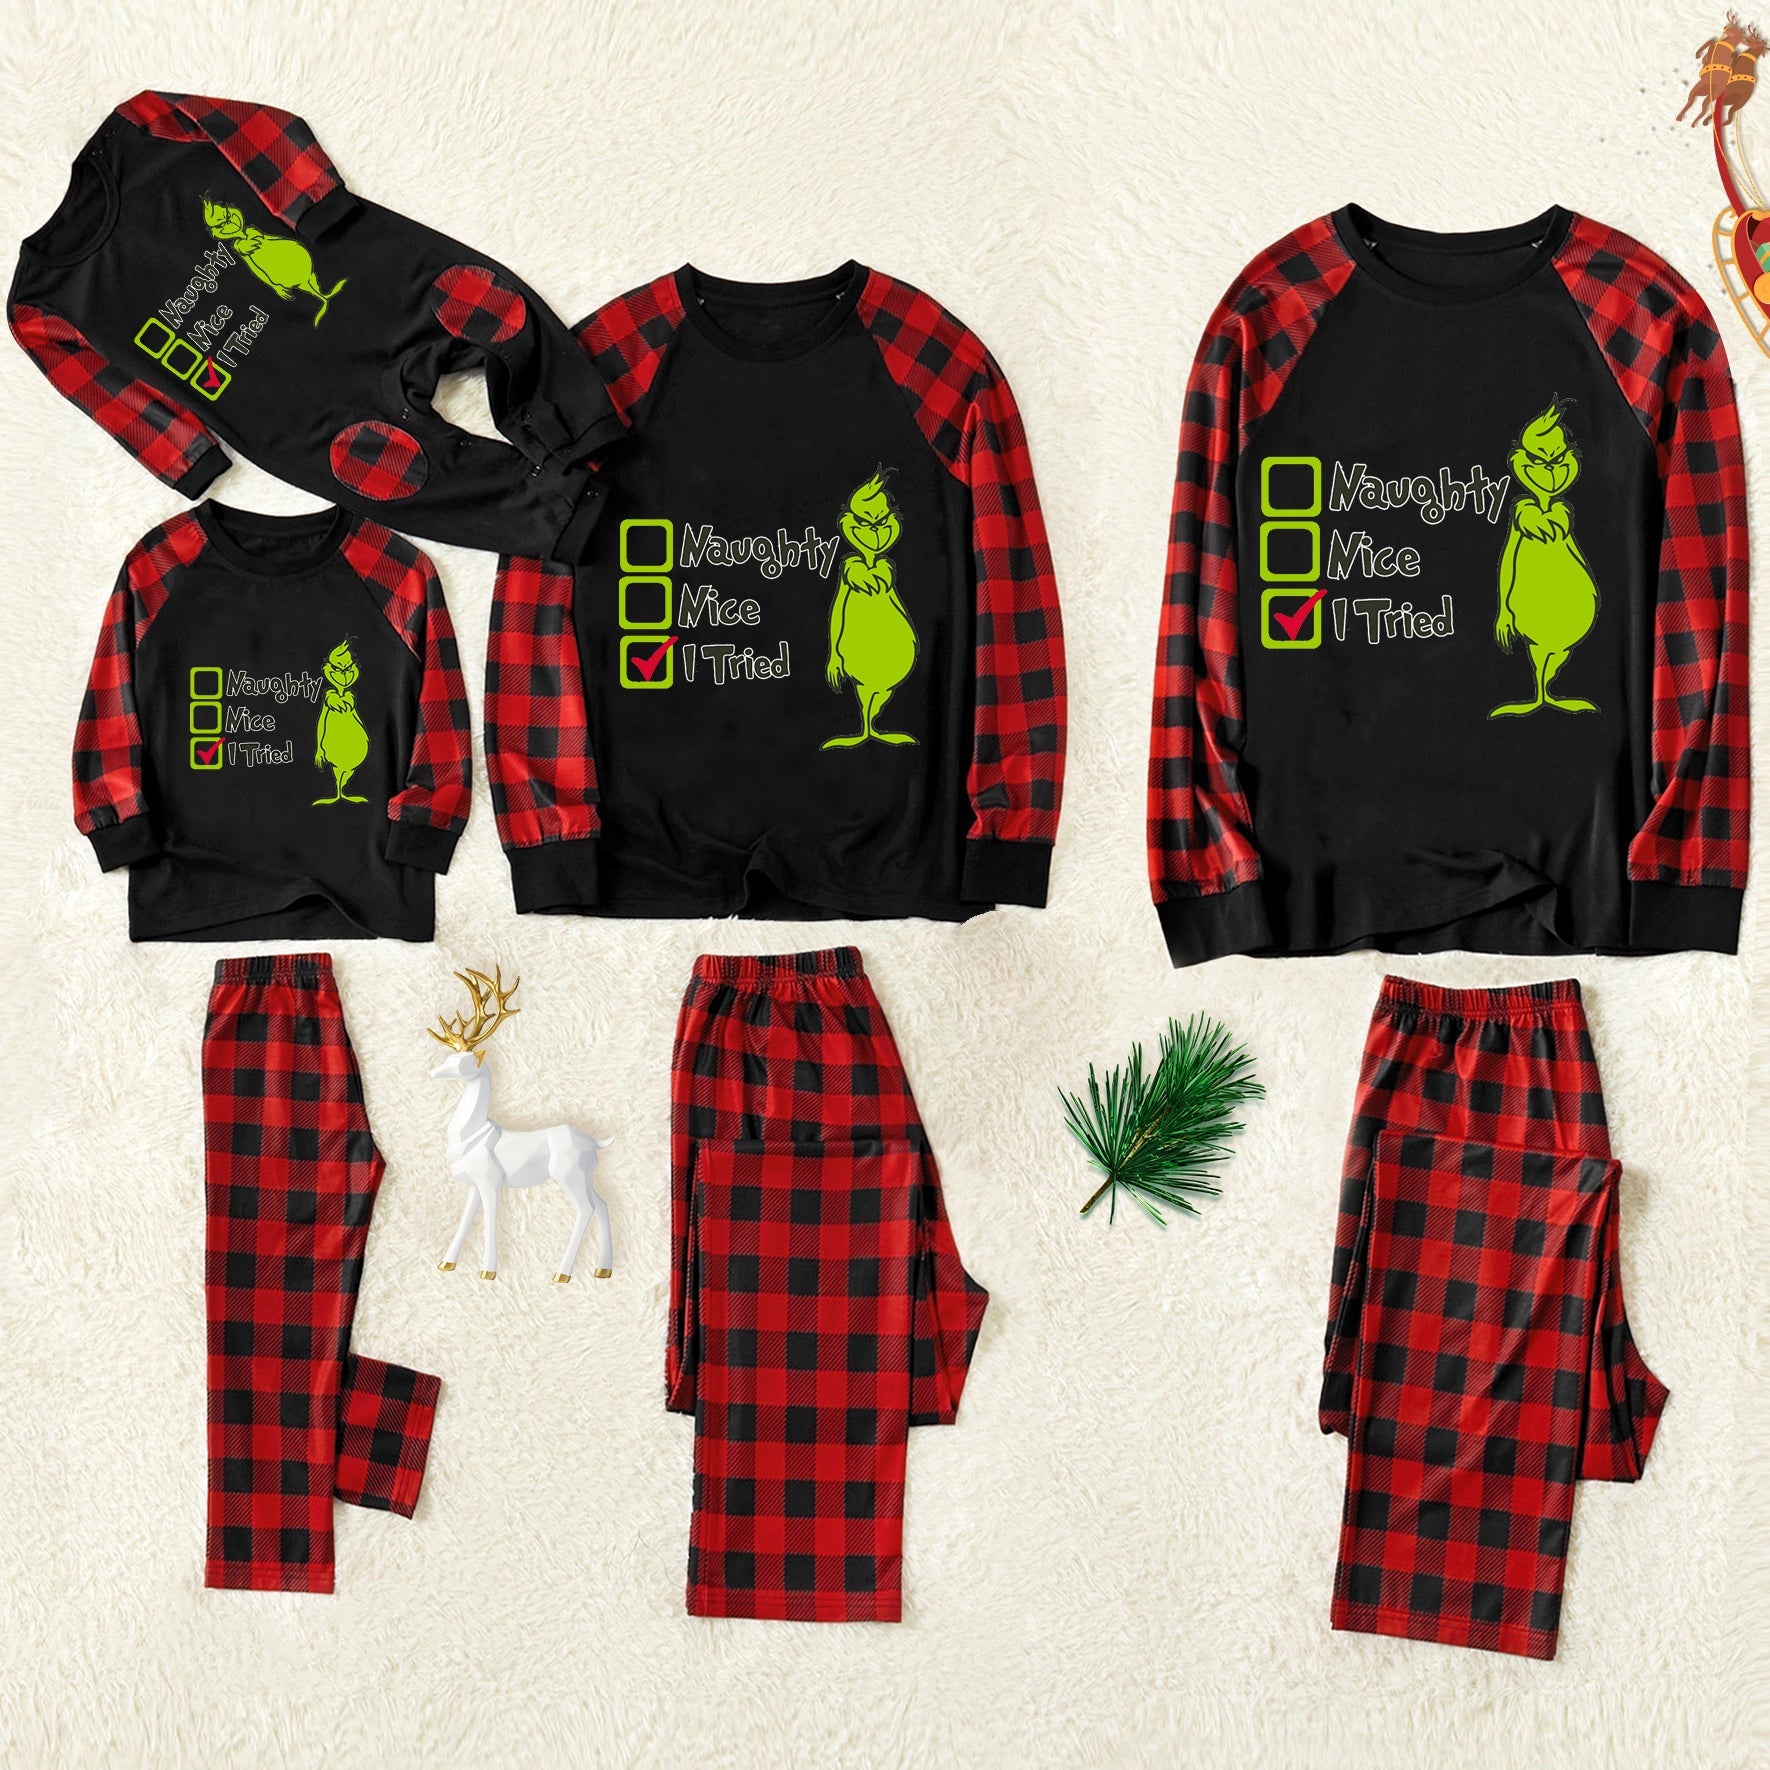 Christmas "Naughty&Nice& I Tried" Letter Print Patterned Casual Long Sleeve Sweatshirts Contrast Black Top and Black & Red Plaid Pants Family Matching Pajamas Set With Pet Bandana